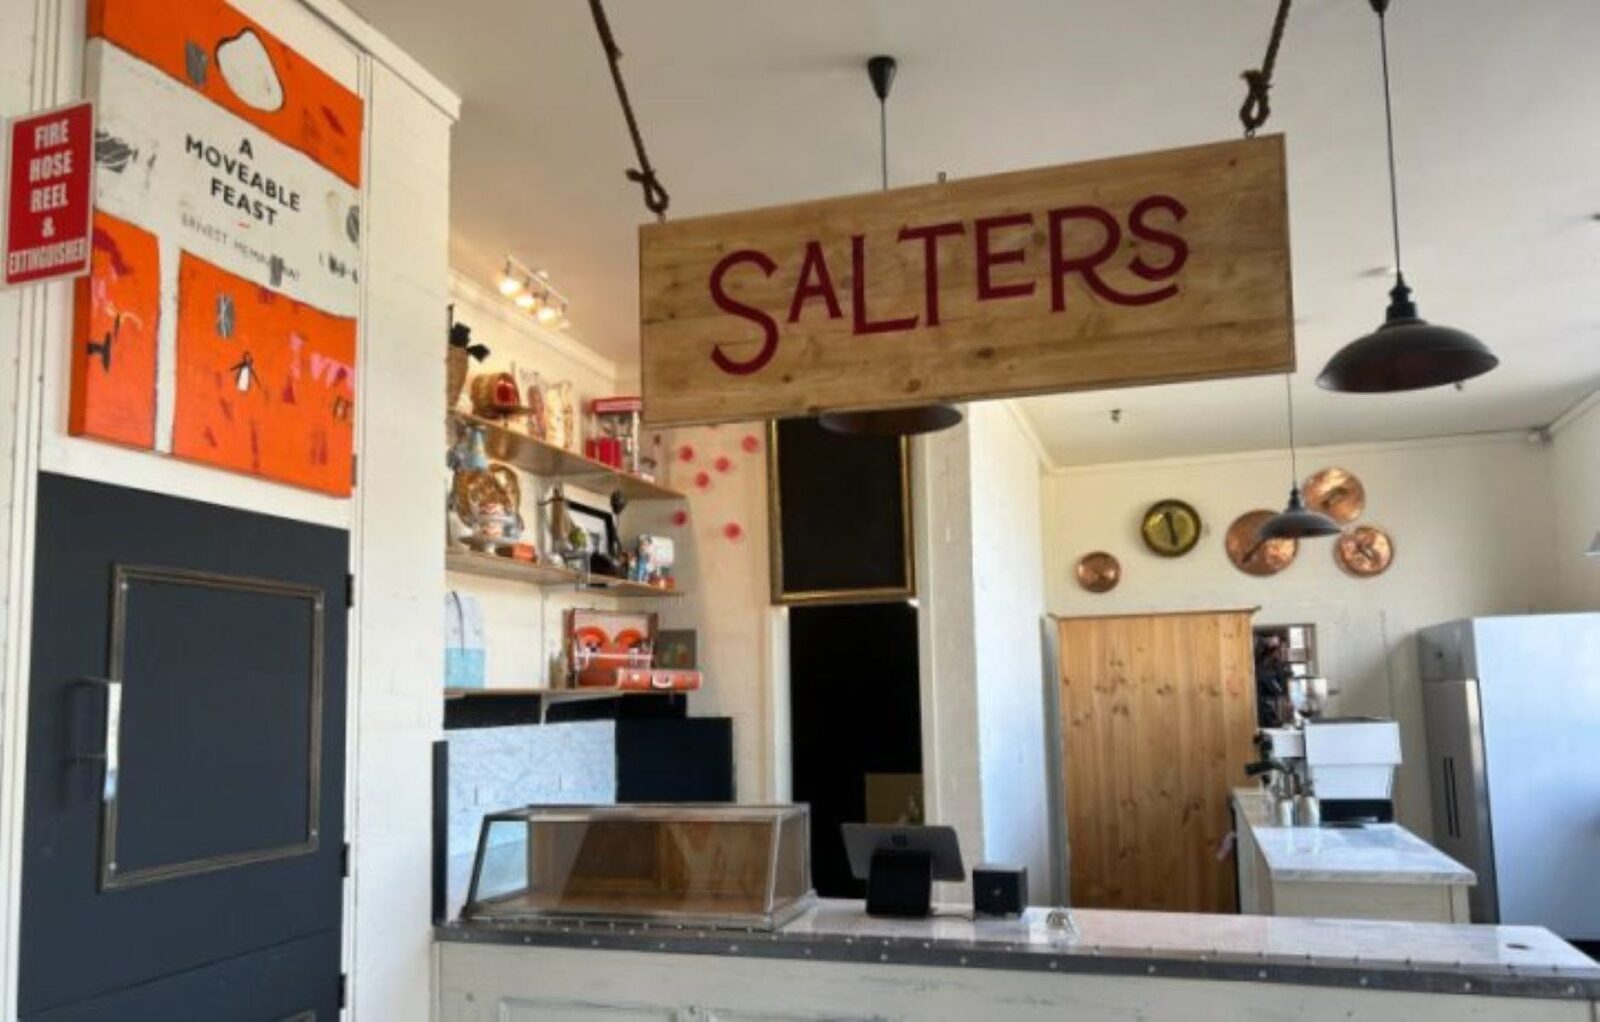 Salters Cafe Canberra